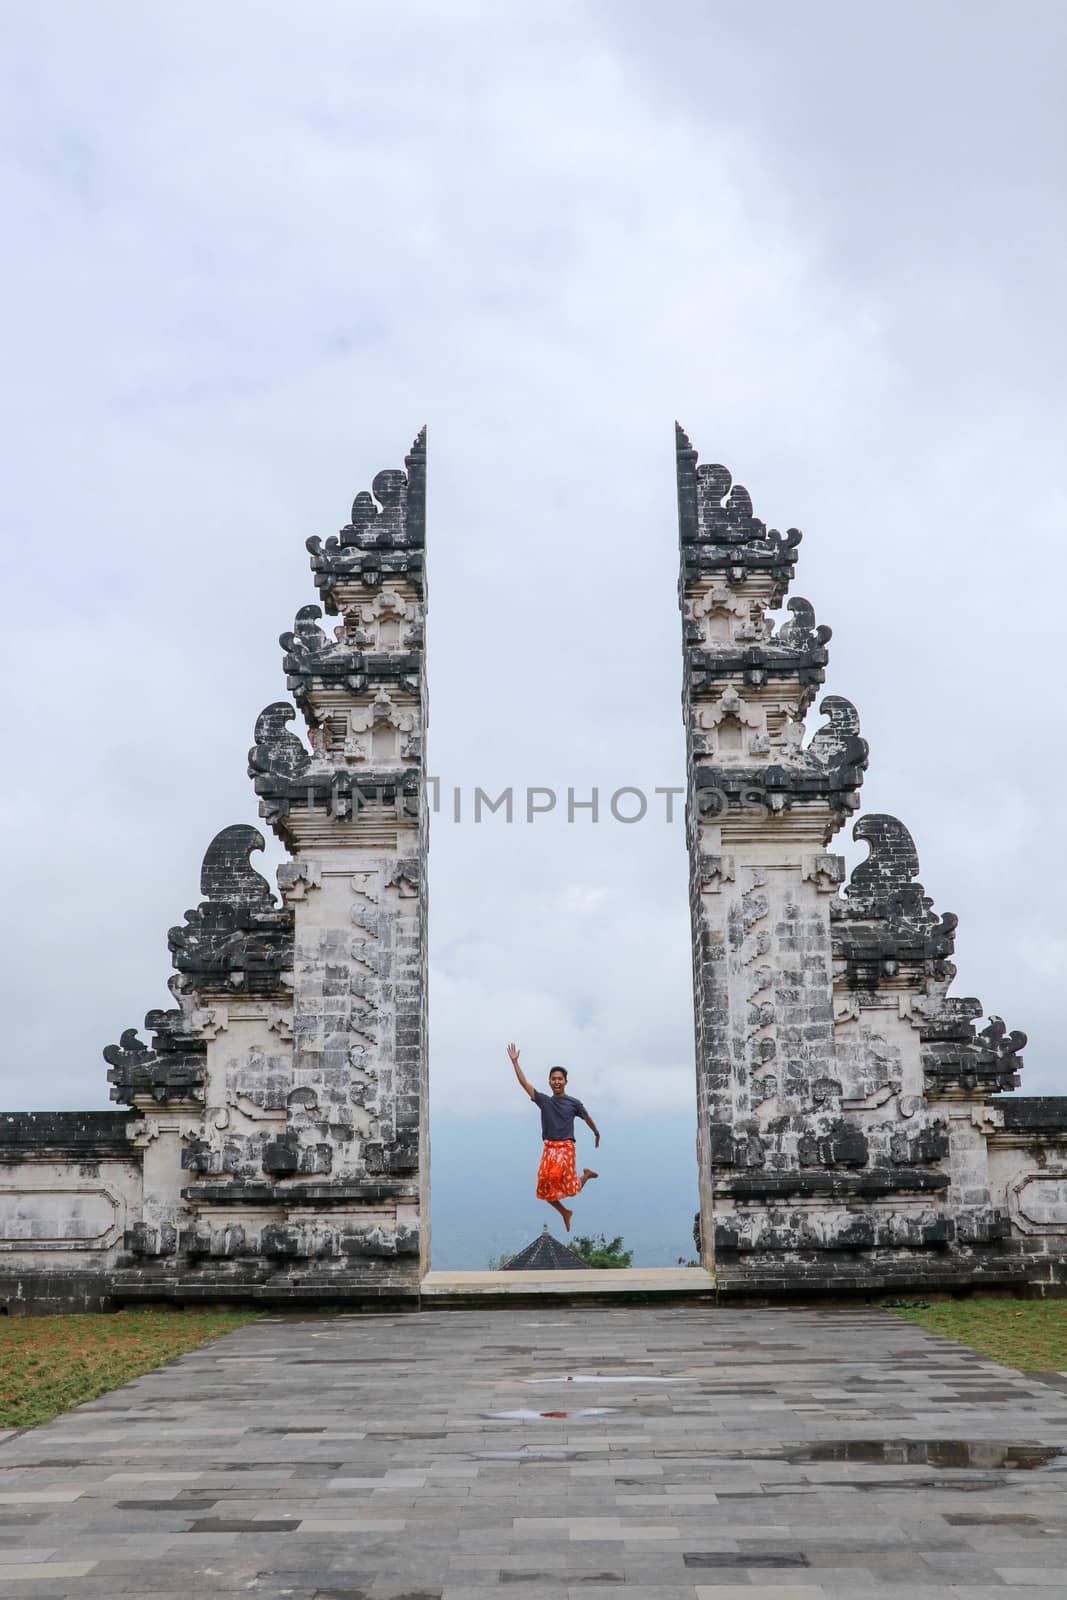 Bali, Indonesia. Young taveler man jumping with energy and happiness in the gate of heaven. Lempuyang temple.